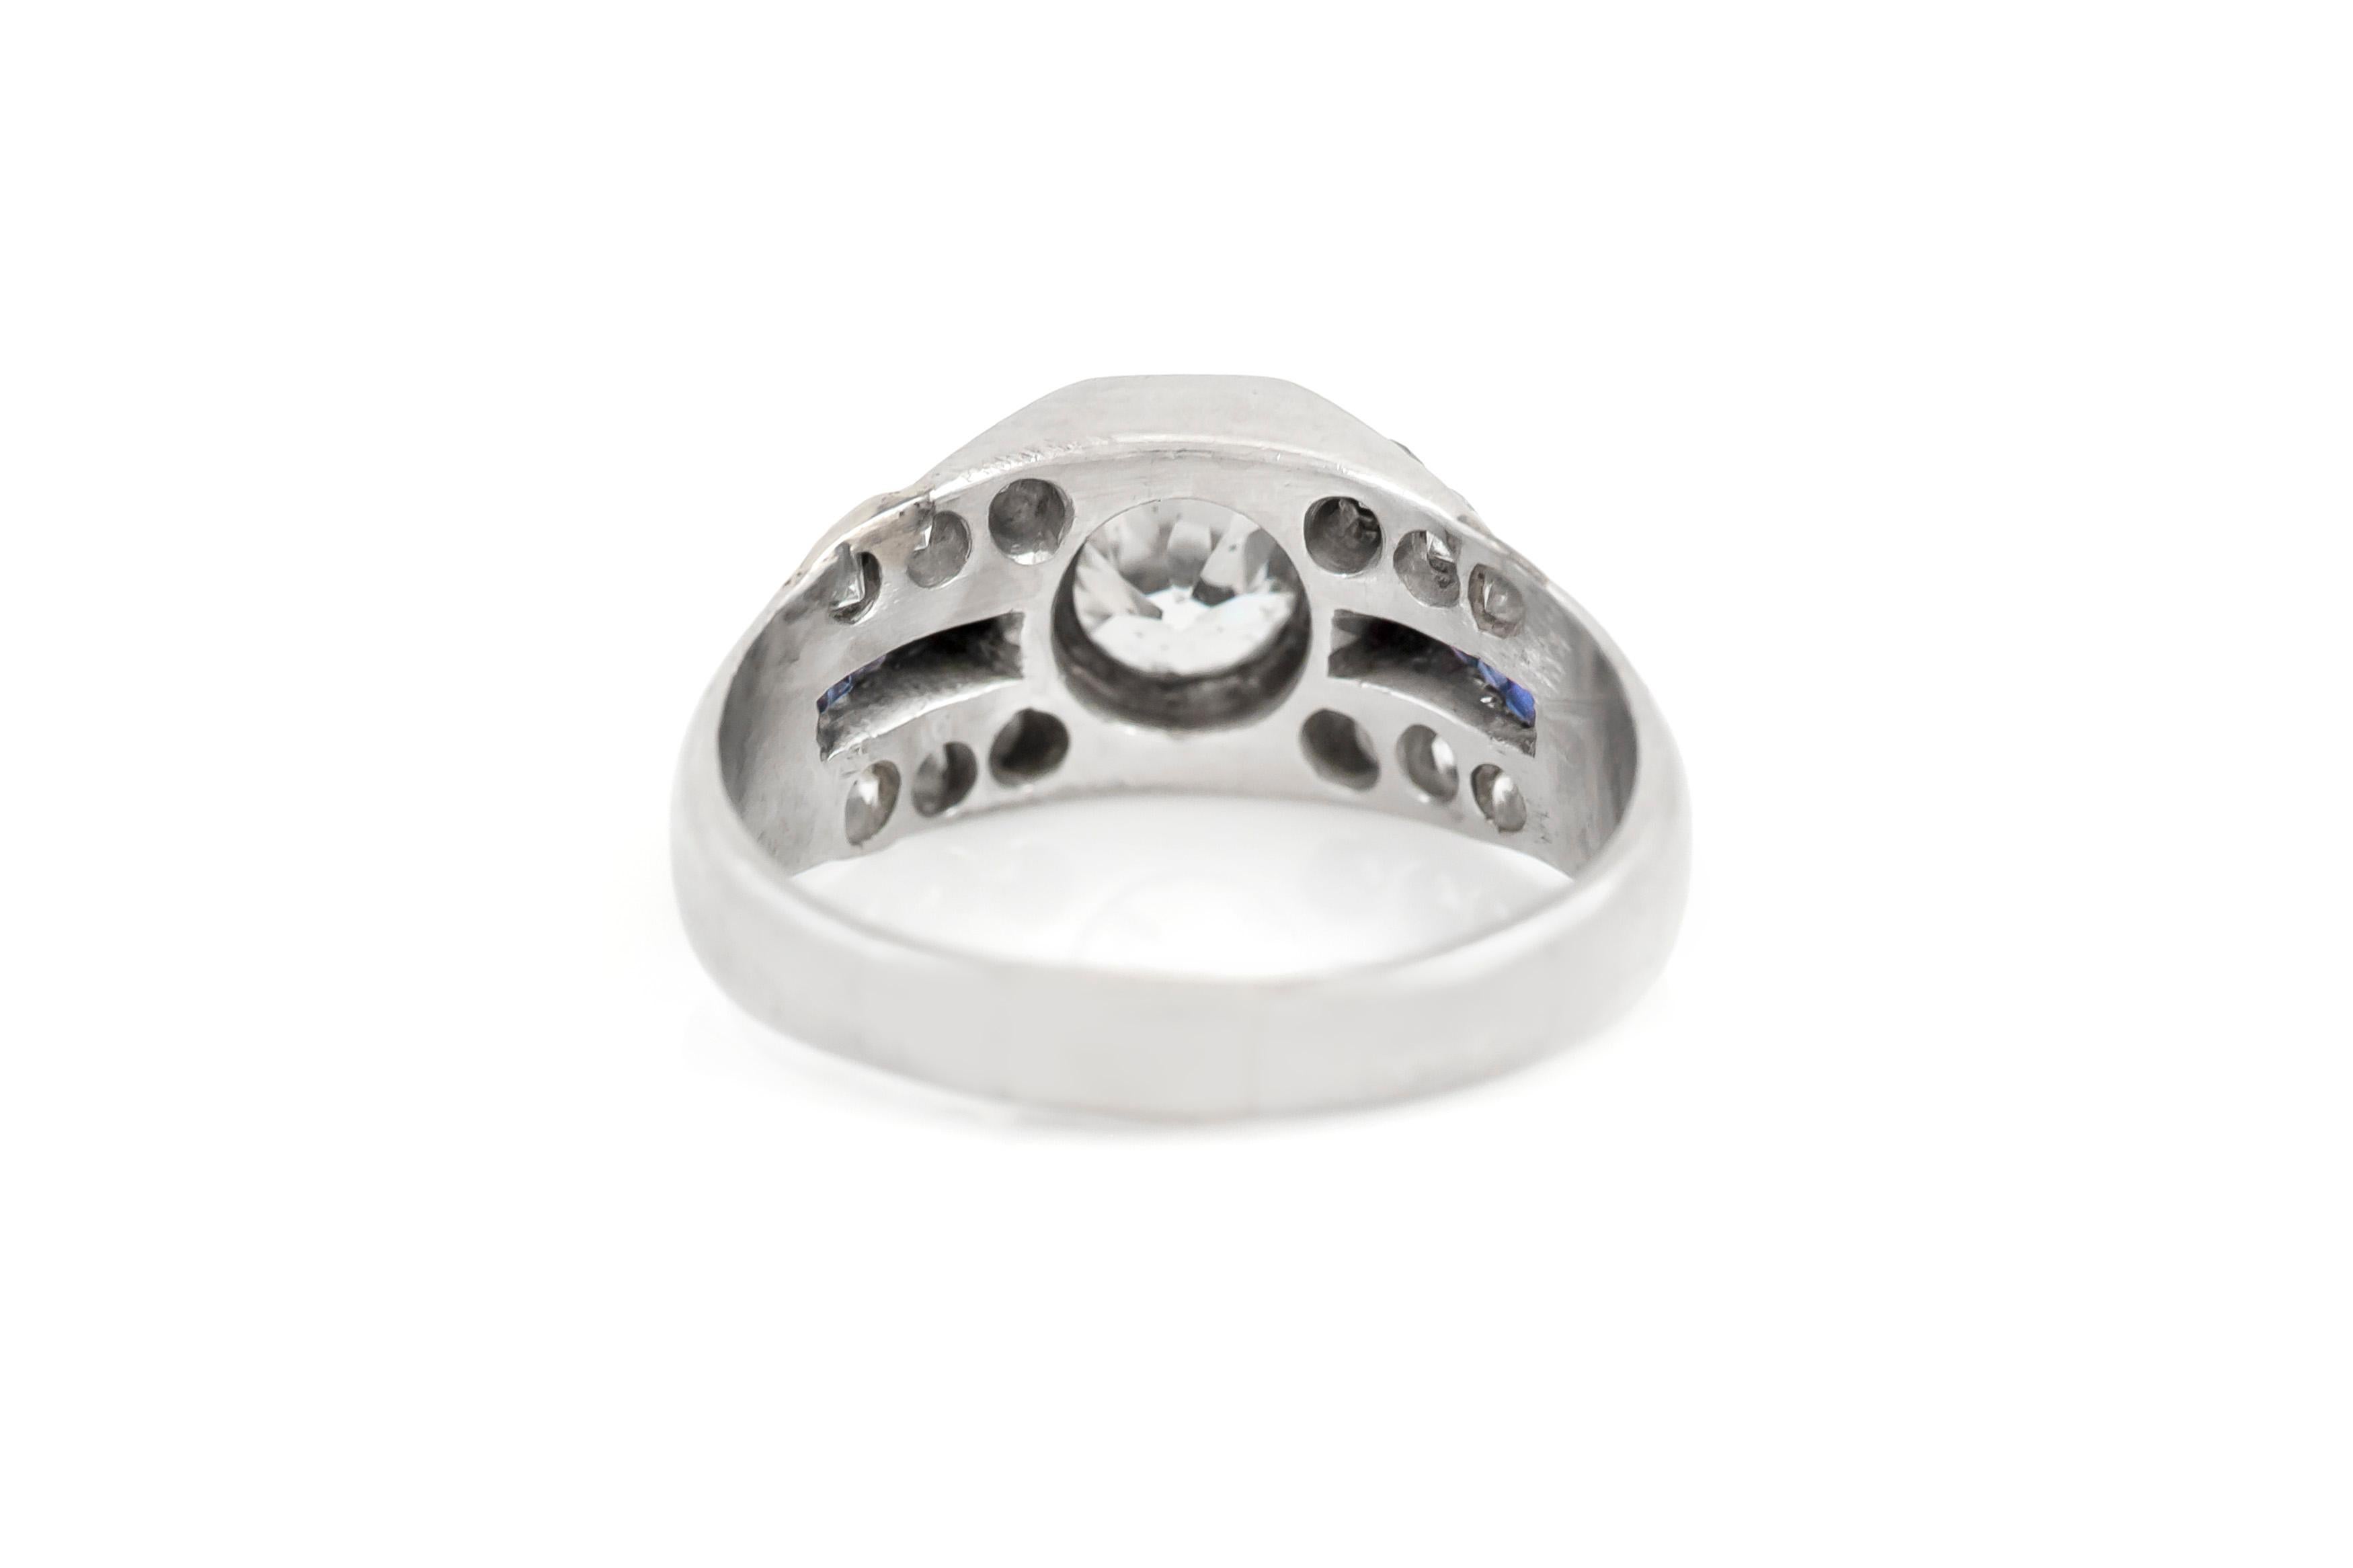 The ring is finely crafted in platinum with sapphire and diamonds weighing approximately 1.00 carat.